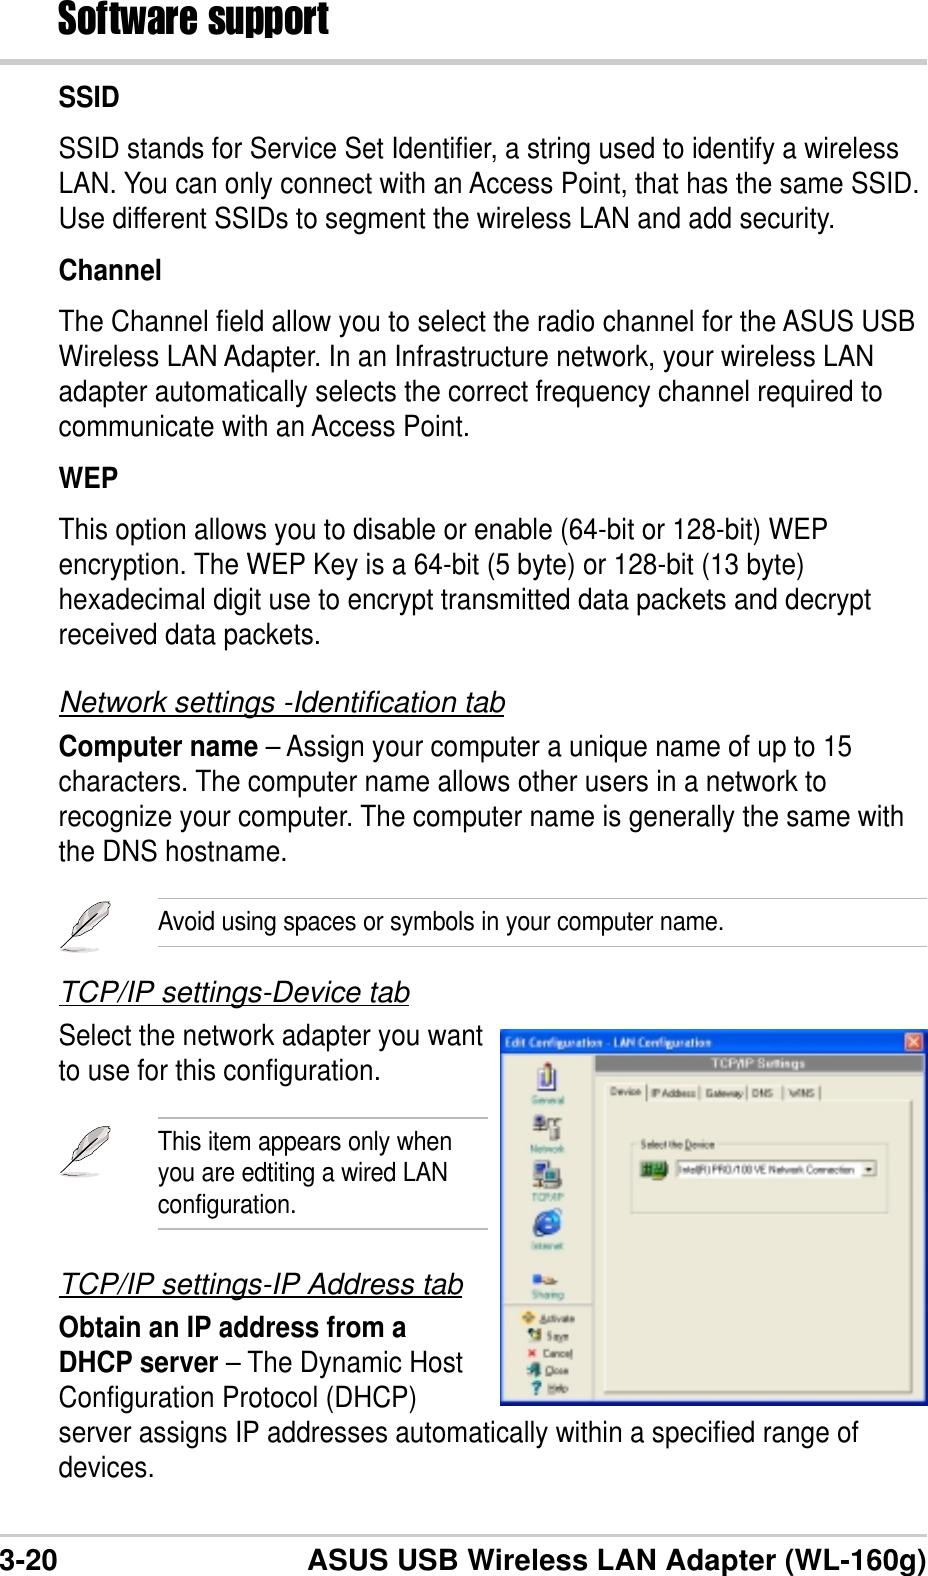 3-20 ASUS USB Wireless LAN Adapter (WL-160g)Software supportSSIDSSID stands for Service Set Identifier, a string used to identify a wirelessLAN. You can only connect with an Access Point, that has the same SSID.Use different SSIDs to segment the wireless LAN and add security.ChannelThe Channel field allow you to select the radio channel for the ASUS USBWireless LAN Adapter. In an Infrastructure network, your wireless LANadapter automatically selects the correct frequency channel required tocommunicate with an Access Point.WEPThis option allows you to disable or enable (64-bit or 128-bit) WEPencryption. The WEP Key is a 64-bit (5 byte) or 128-bit (13 byte)hexadecimal digit use to encrypt transmitted data packets and decryptreceived data packets.Network settings -Identification tabComputer name – Assign your computer a unique name of up to 15characters. The computer name allows other users in a network torecognize your computer. The computer name is generally the same withthe DNS hostname.Avoid using spaces or symbols in your computer name.TCP/IP settings-Device tabSelect the network adapter you wantto use for this configuration.This item appears only whenyou are edtiting a wired LANconfiguration.TCP/IP settings-IP Address tabObtain an IP address from aDHCP server – The Dynamic HostConfiguration Protocol (DHCP)server assigns IP addresses automatically within a specified range ofdevices.